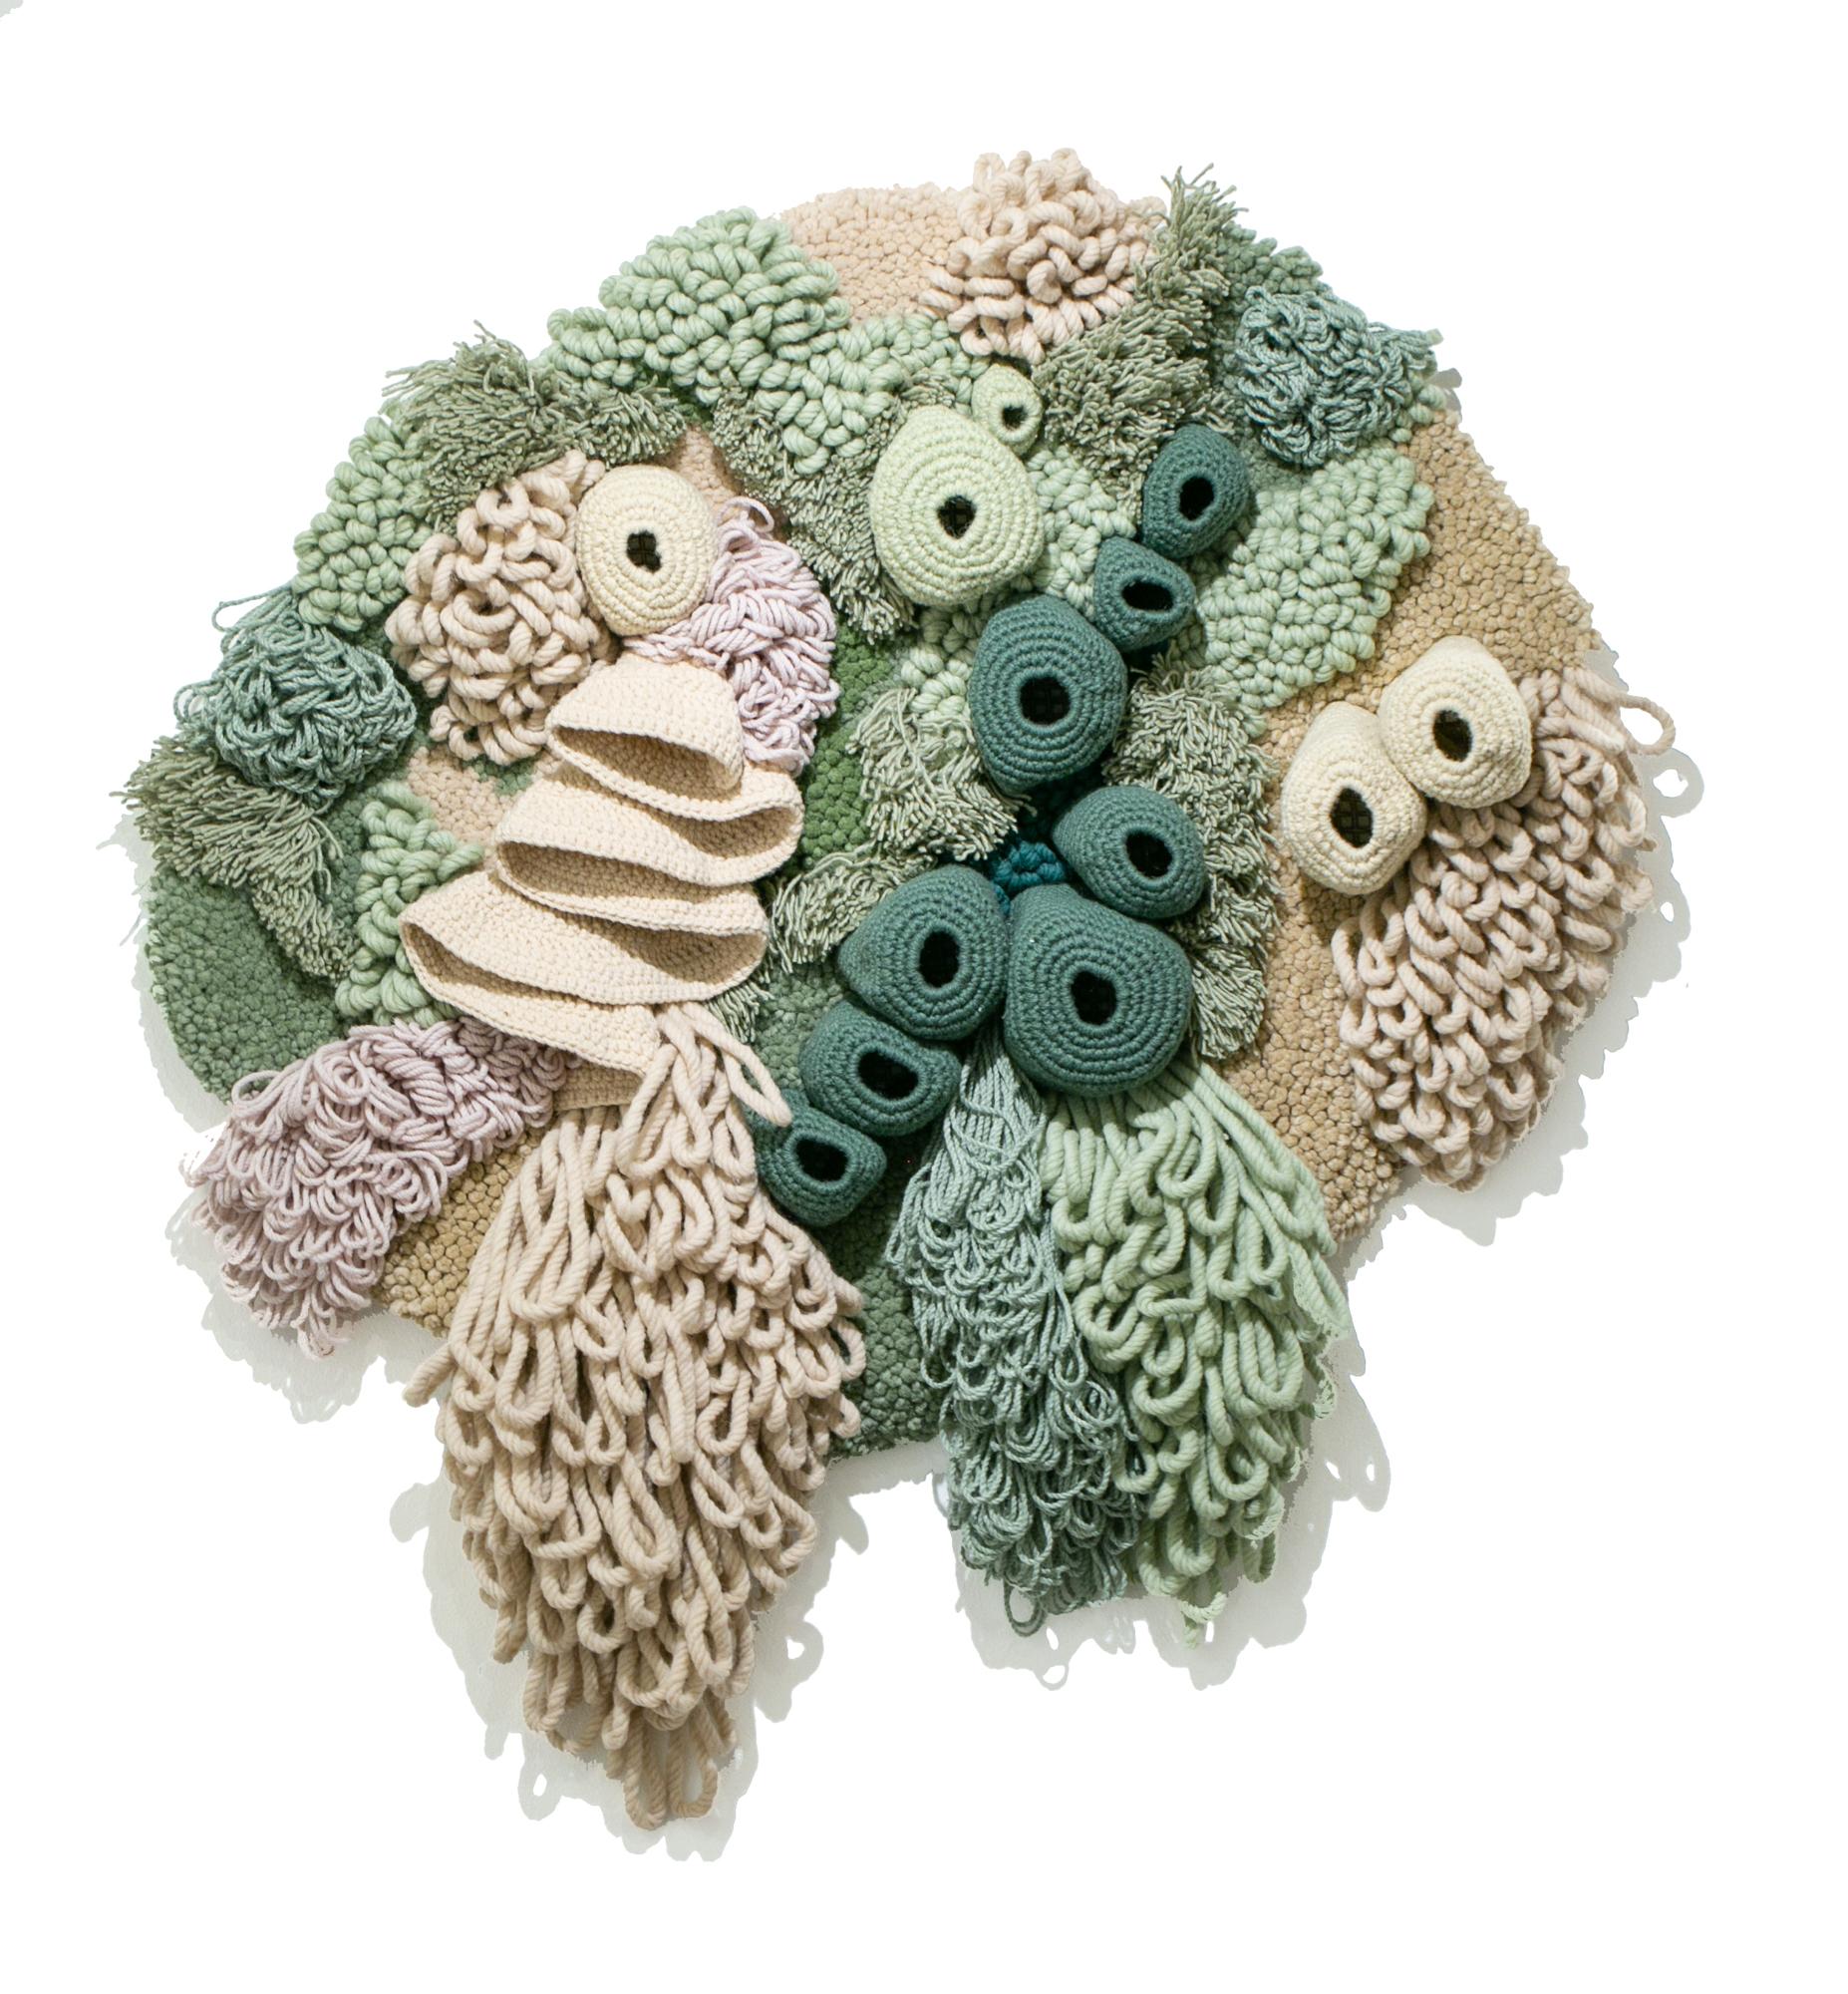 "Coralium, " Large Recycled Pastel Textile Wall Hanging Fabric Sculpture - Mixed Media Art by Vanessa Barragão